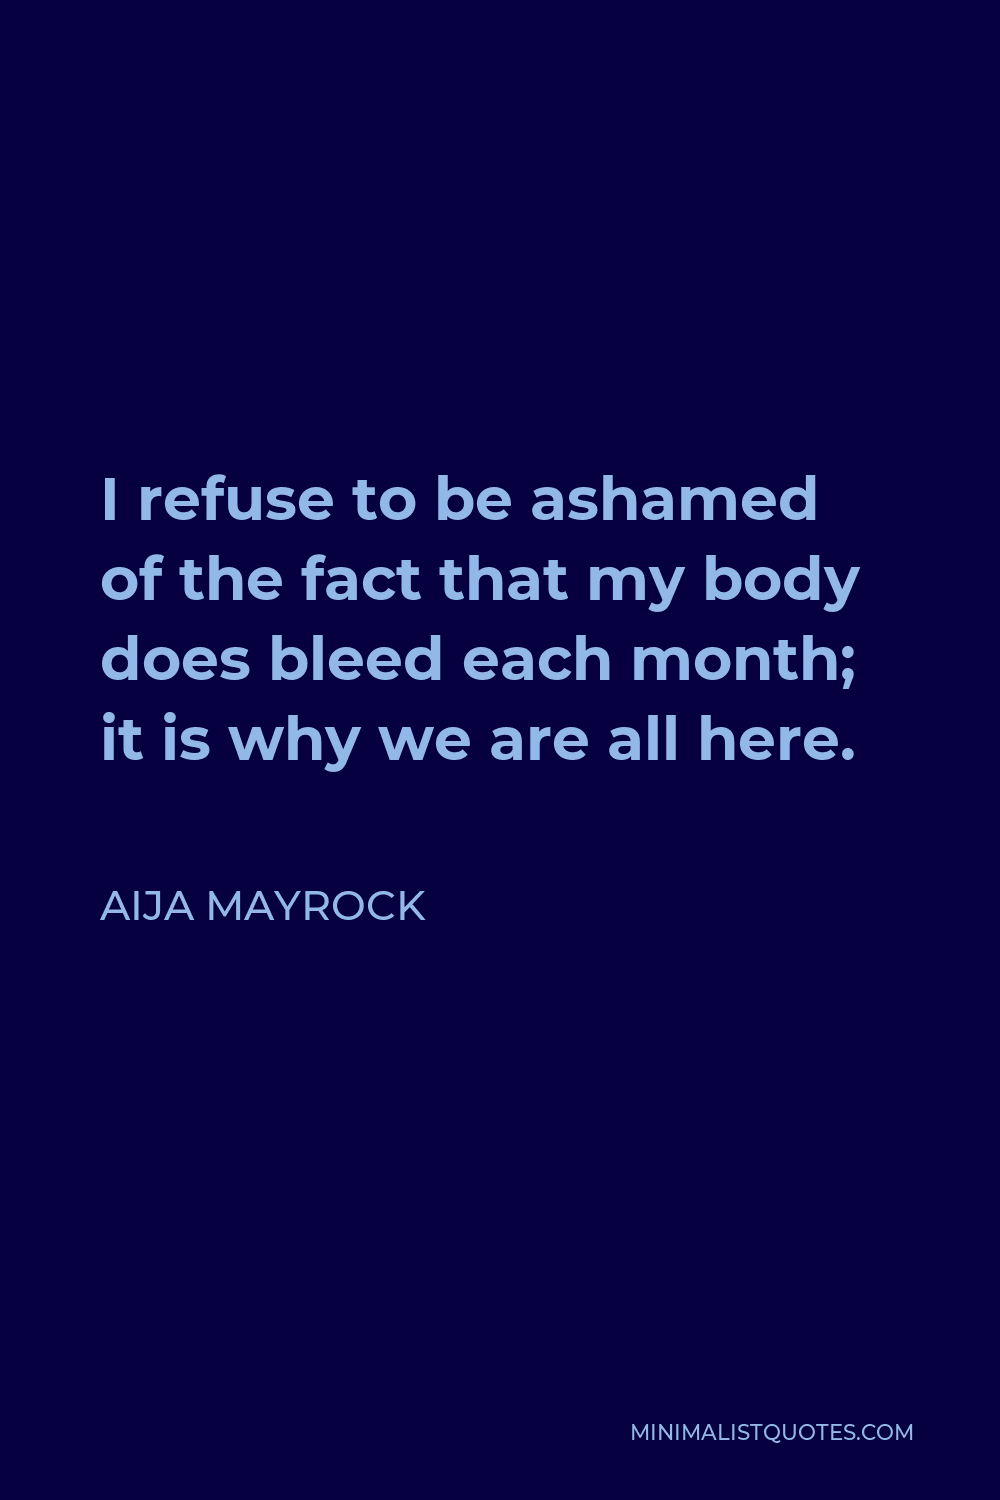 Aija Mayrock Quote - I refuse to be ashamed of the fact that my body does bleed each month; it is why we are all here.